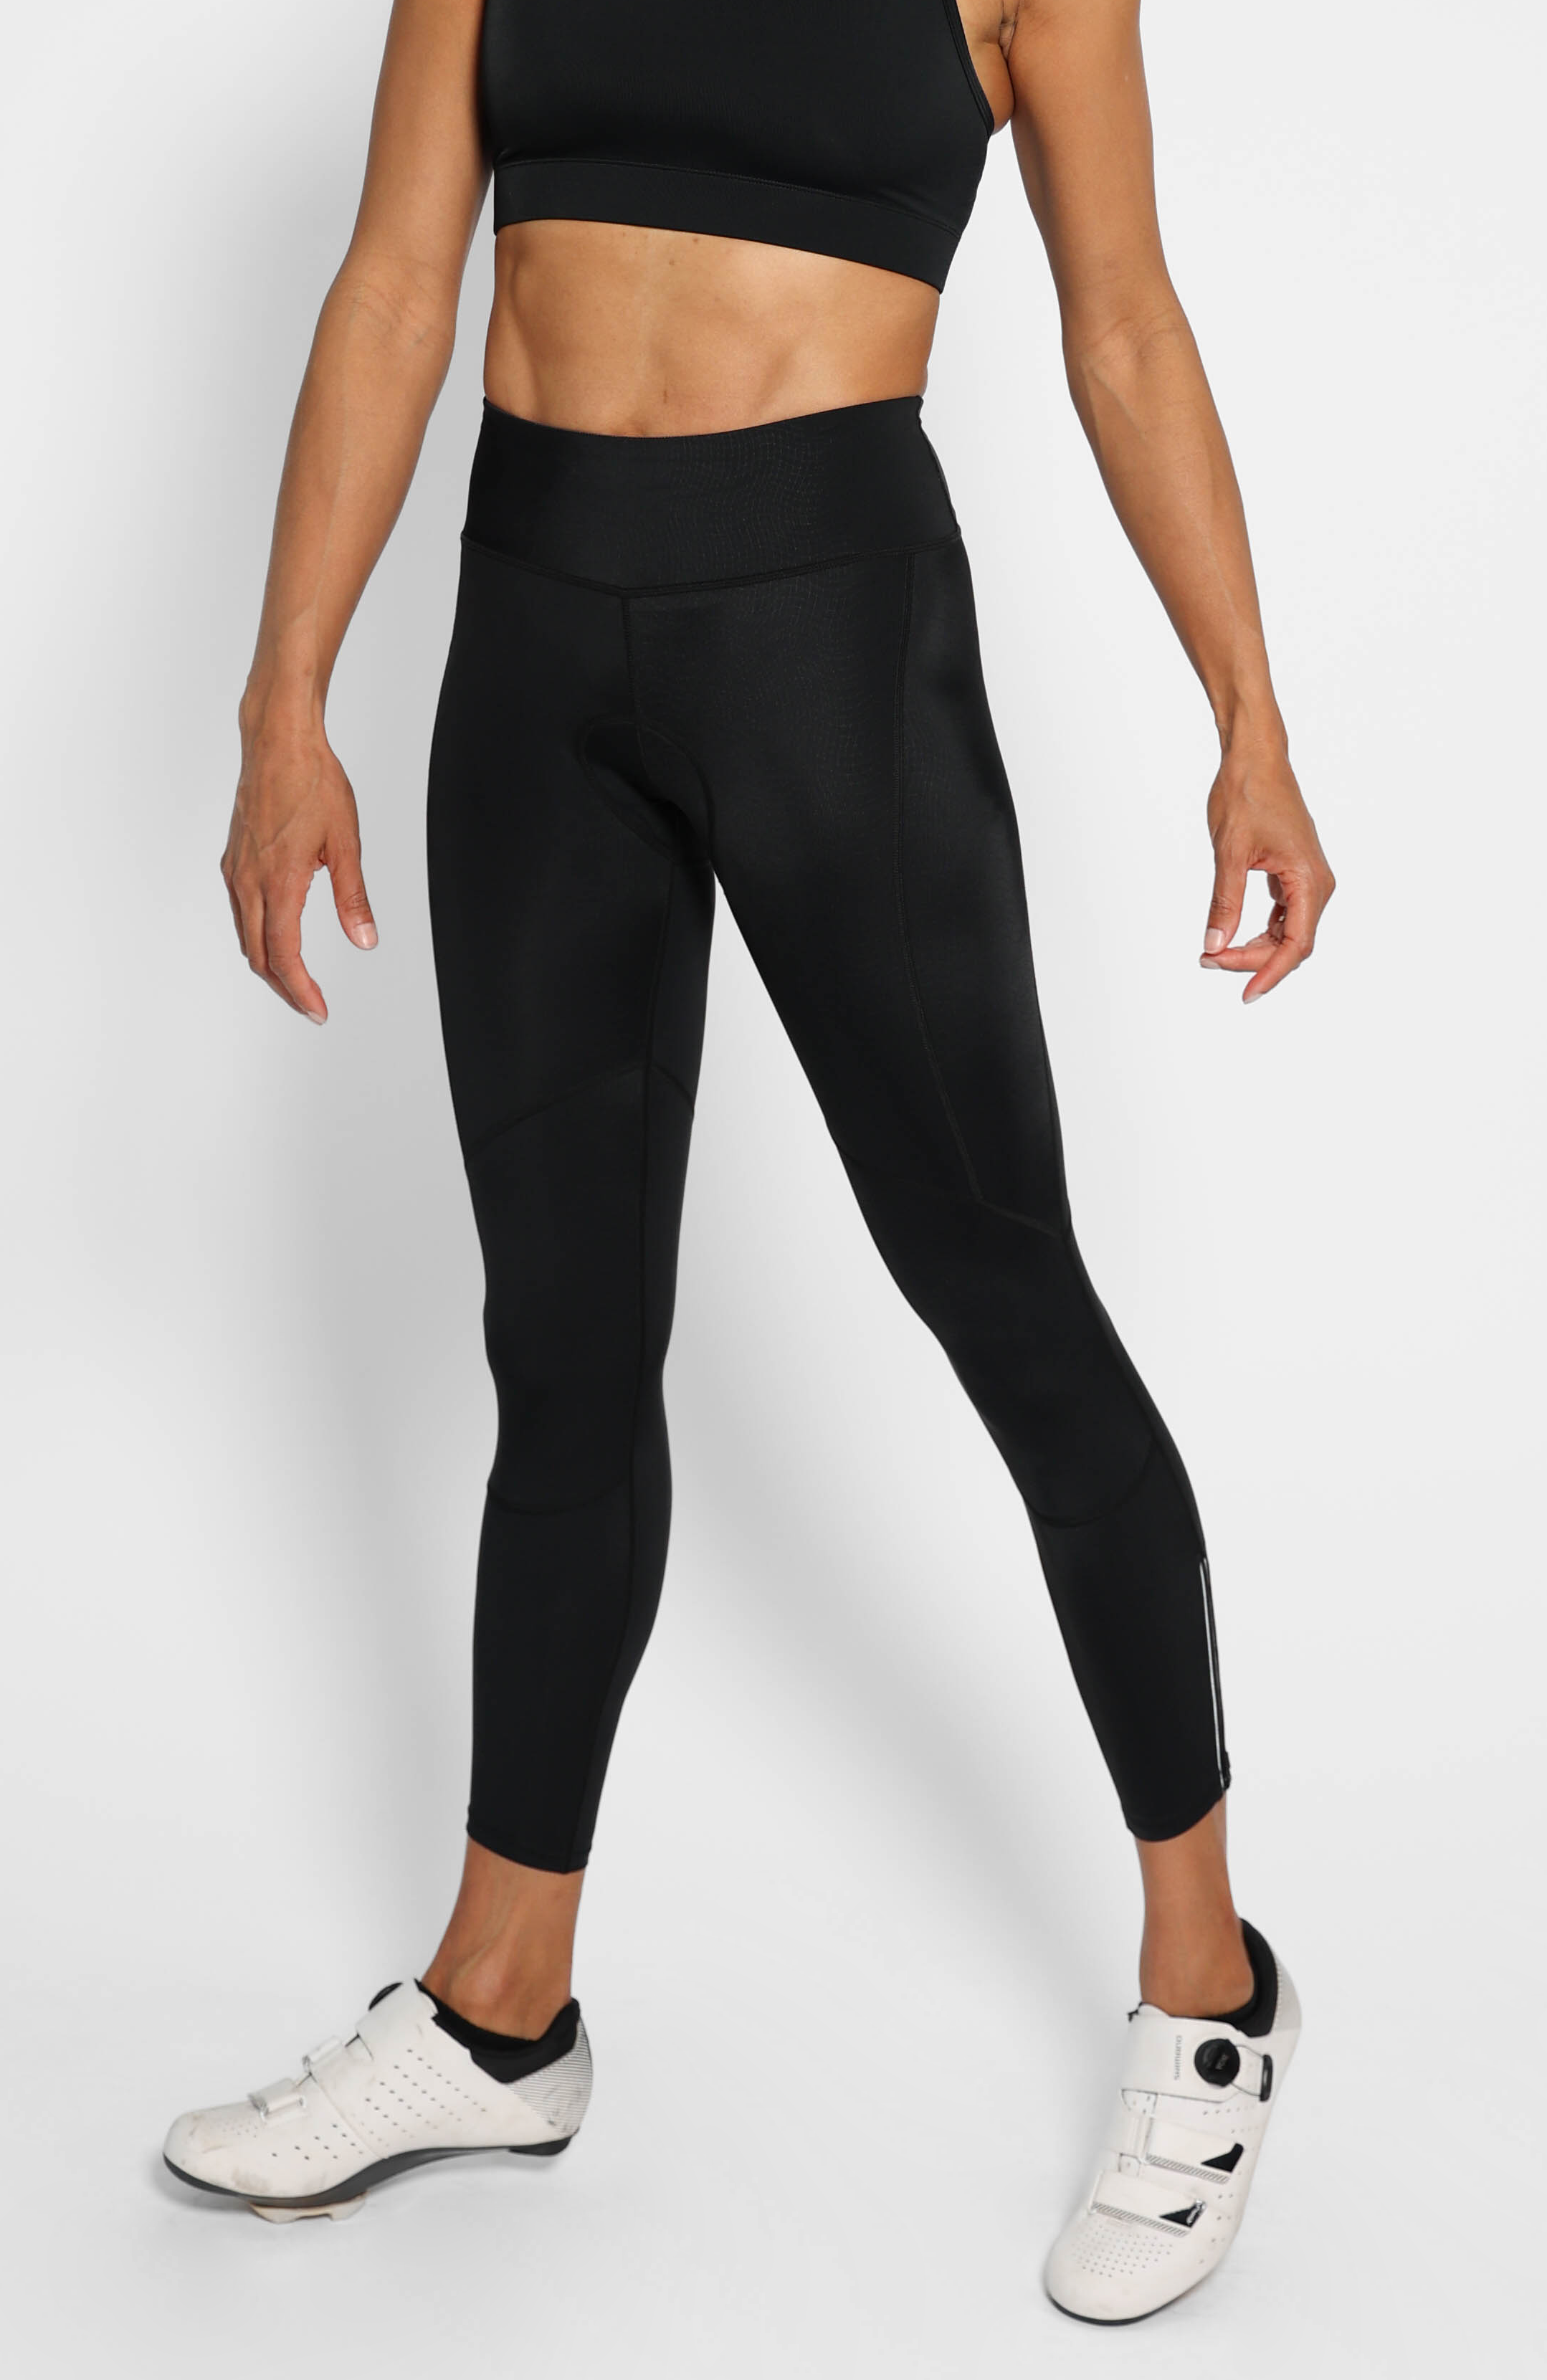 Women Cycling Tights Padded STY-05